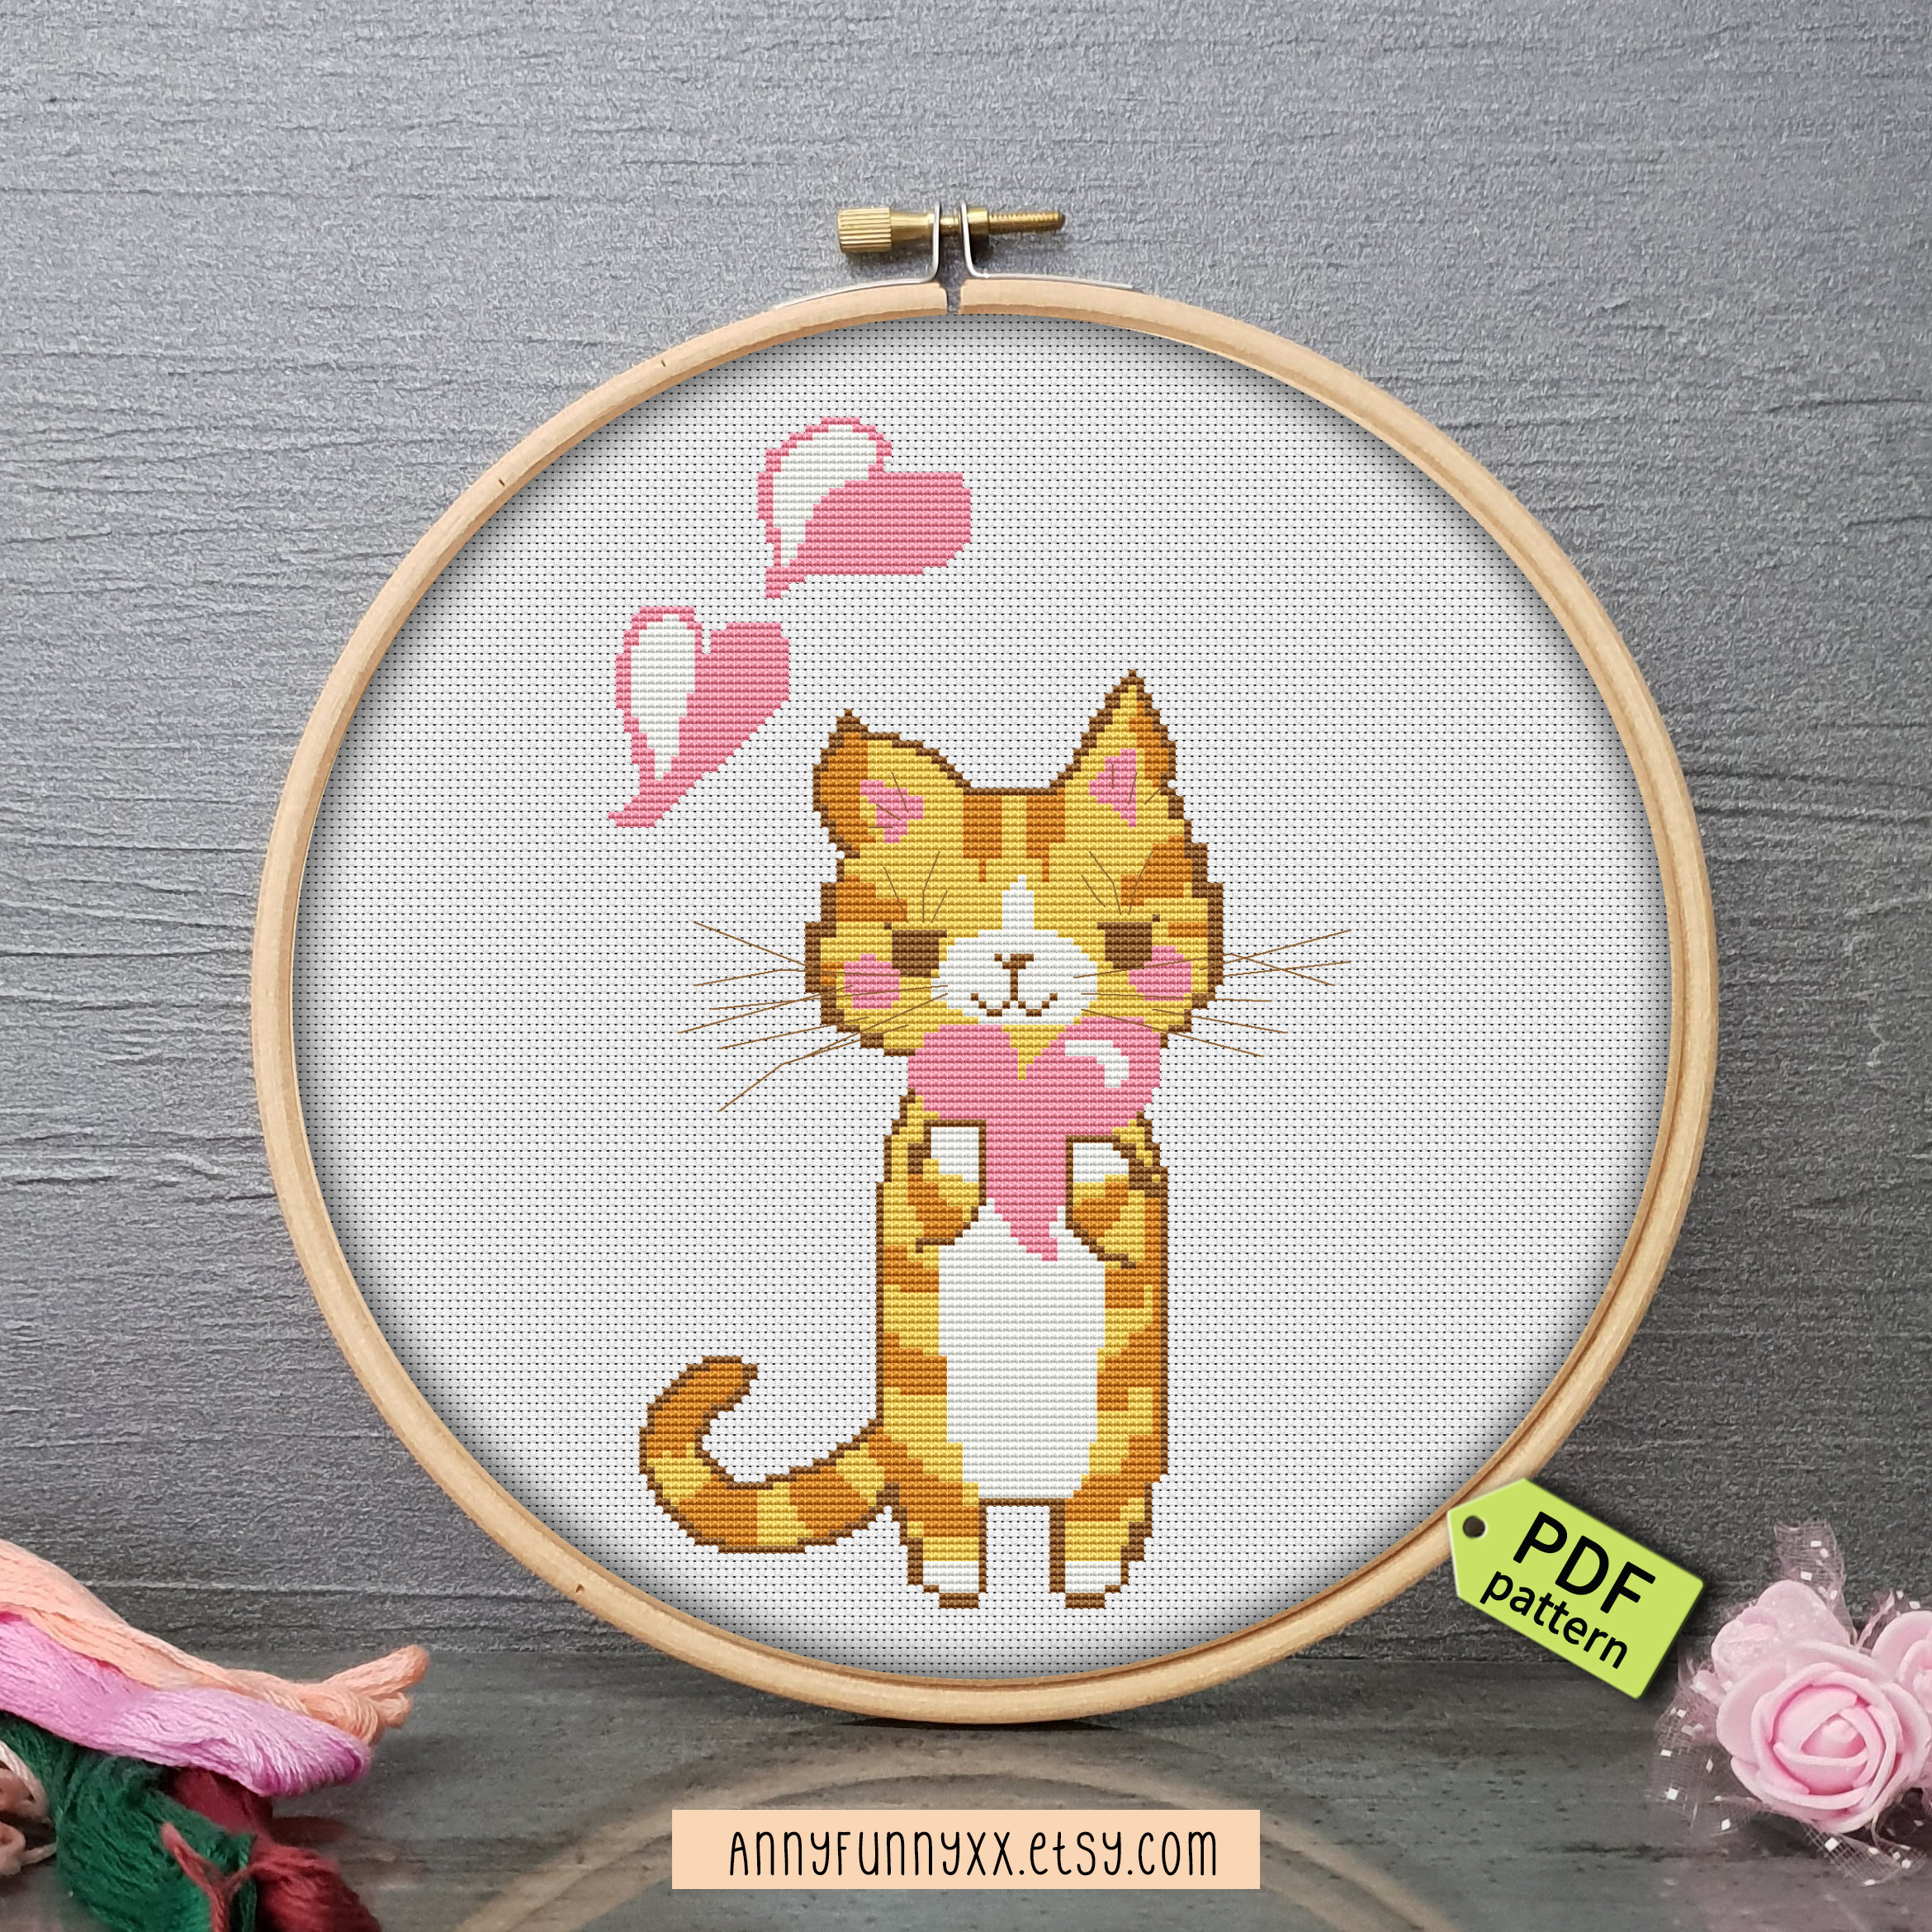 Cat Embroidery Patterns Cute Cat Cross Stitch Pattern Pdf Funny Embroidery Patterns Lovely Small Cat With Heart Valentines Day Gift Embroidery Pattern